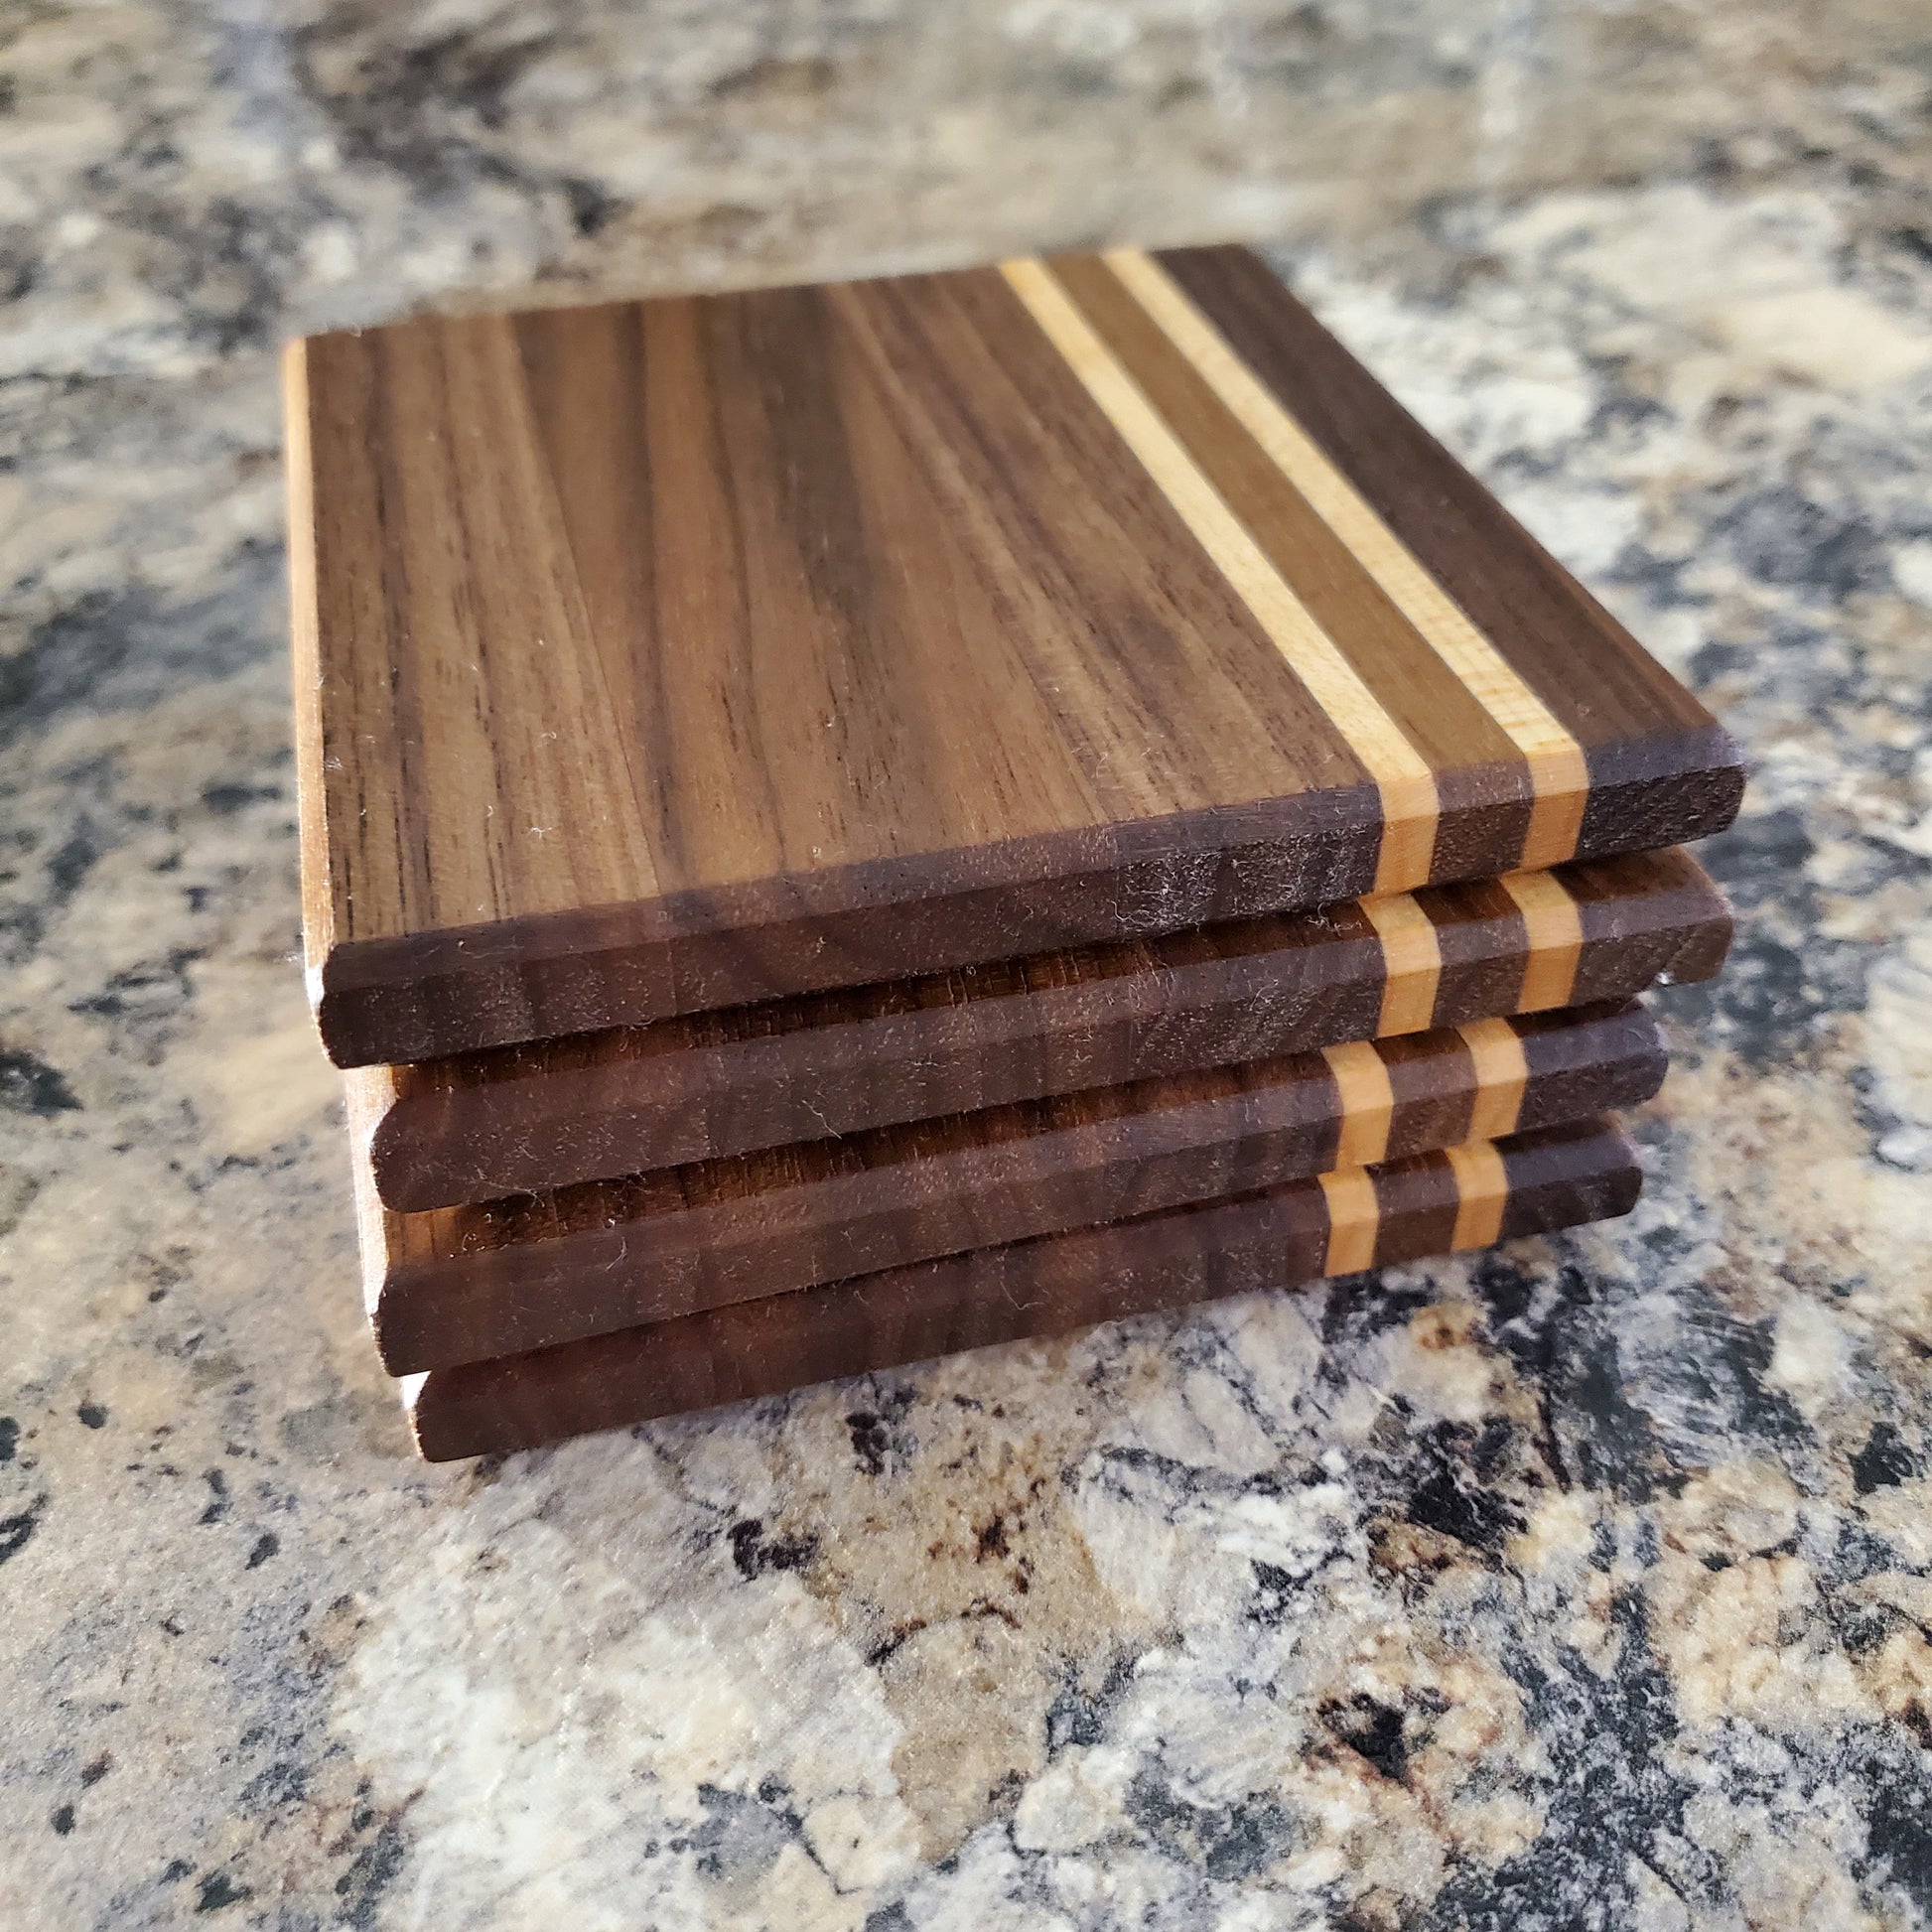 Coasters - Wooden - Made From Walnut, Maple And Exotic African